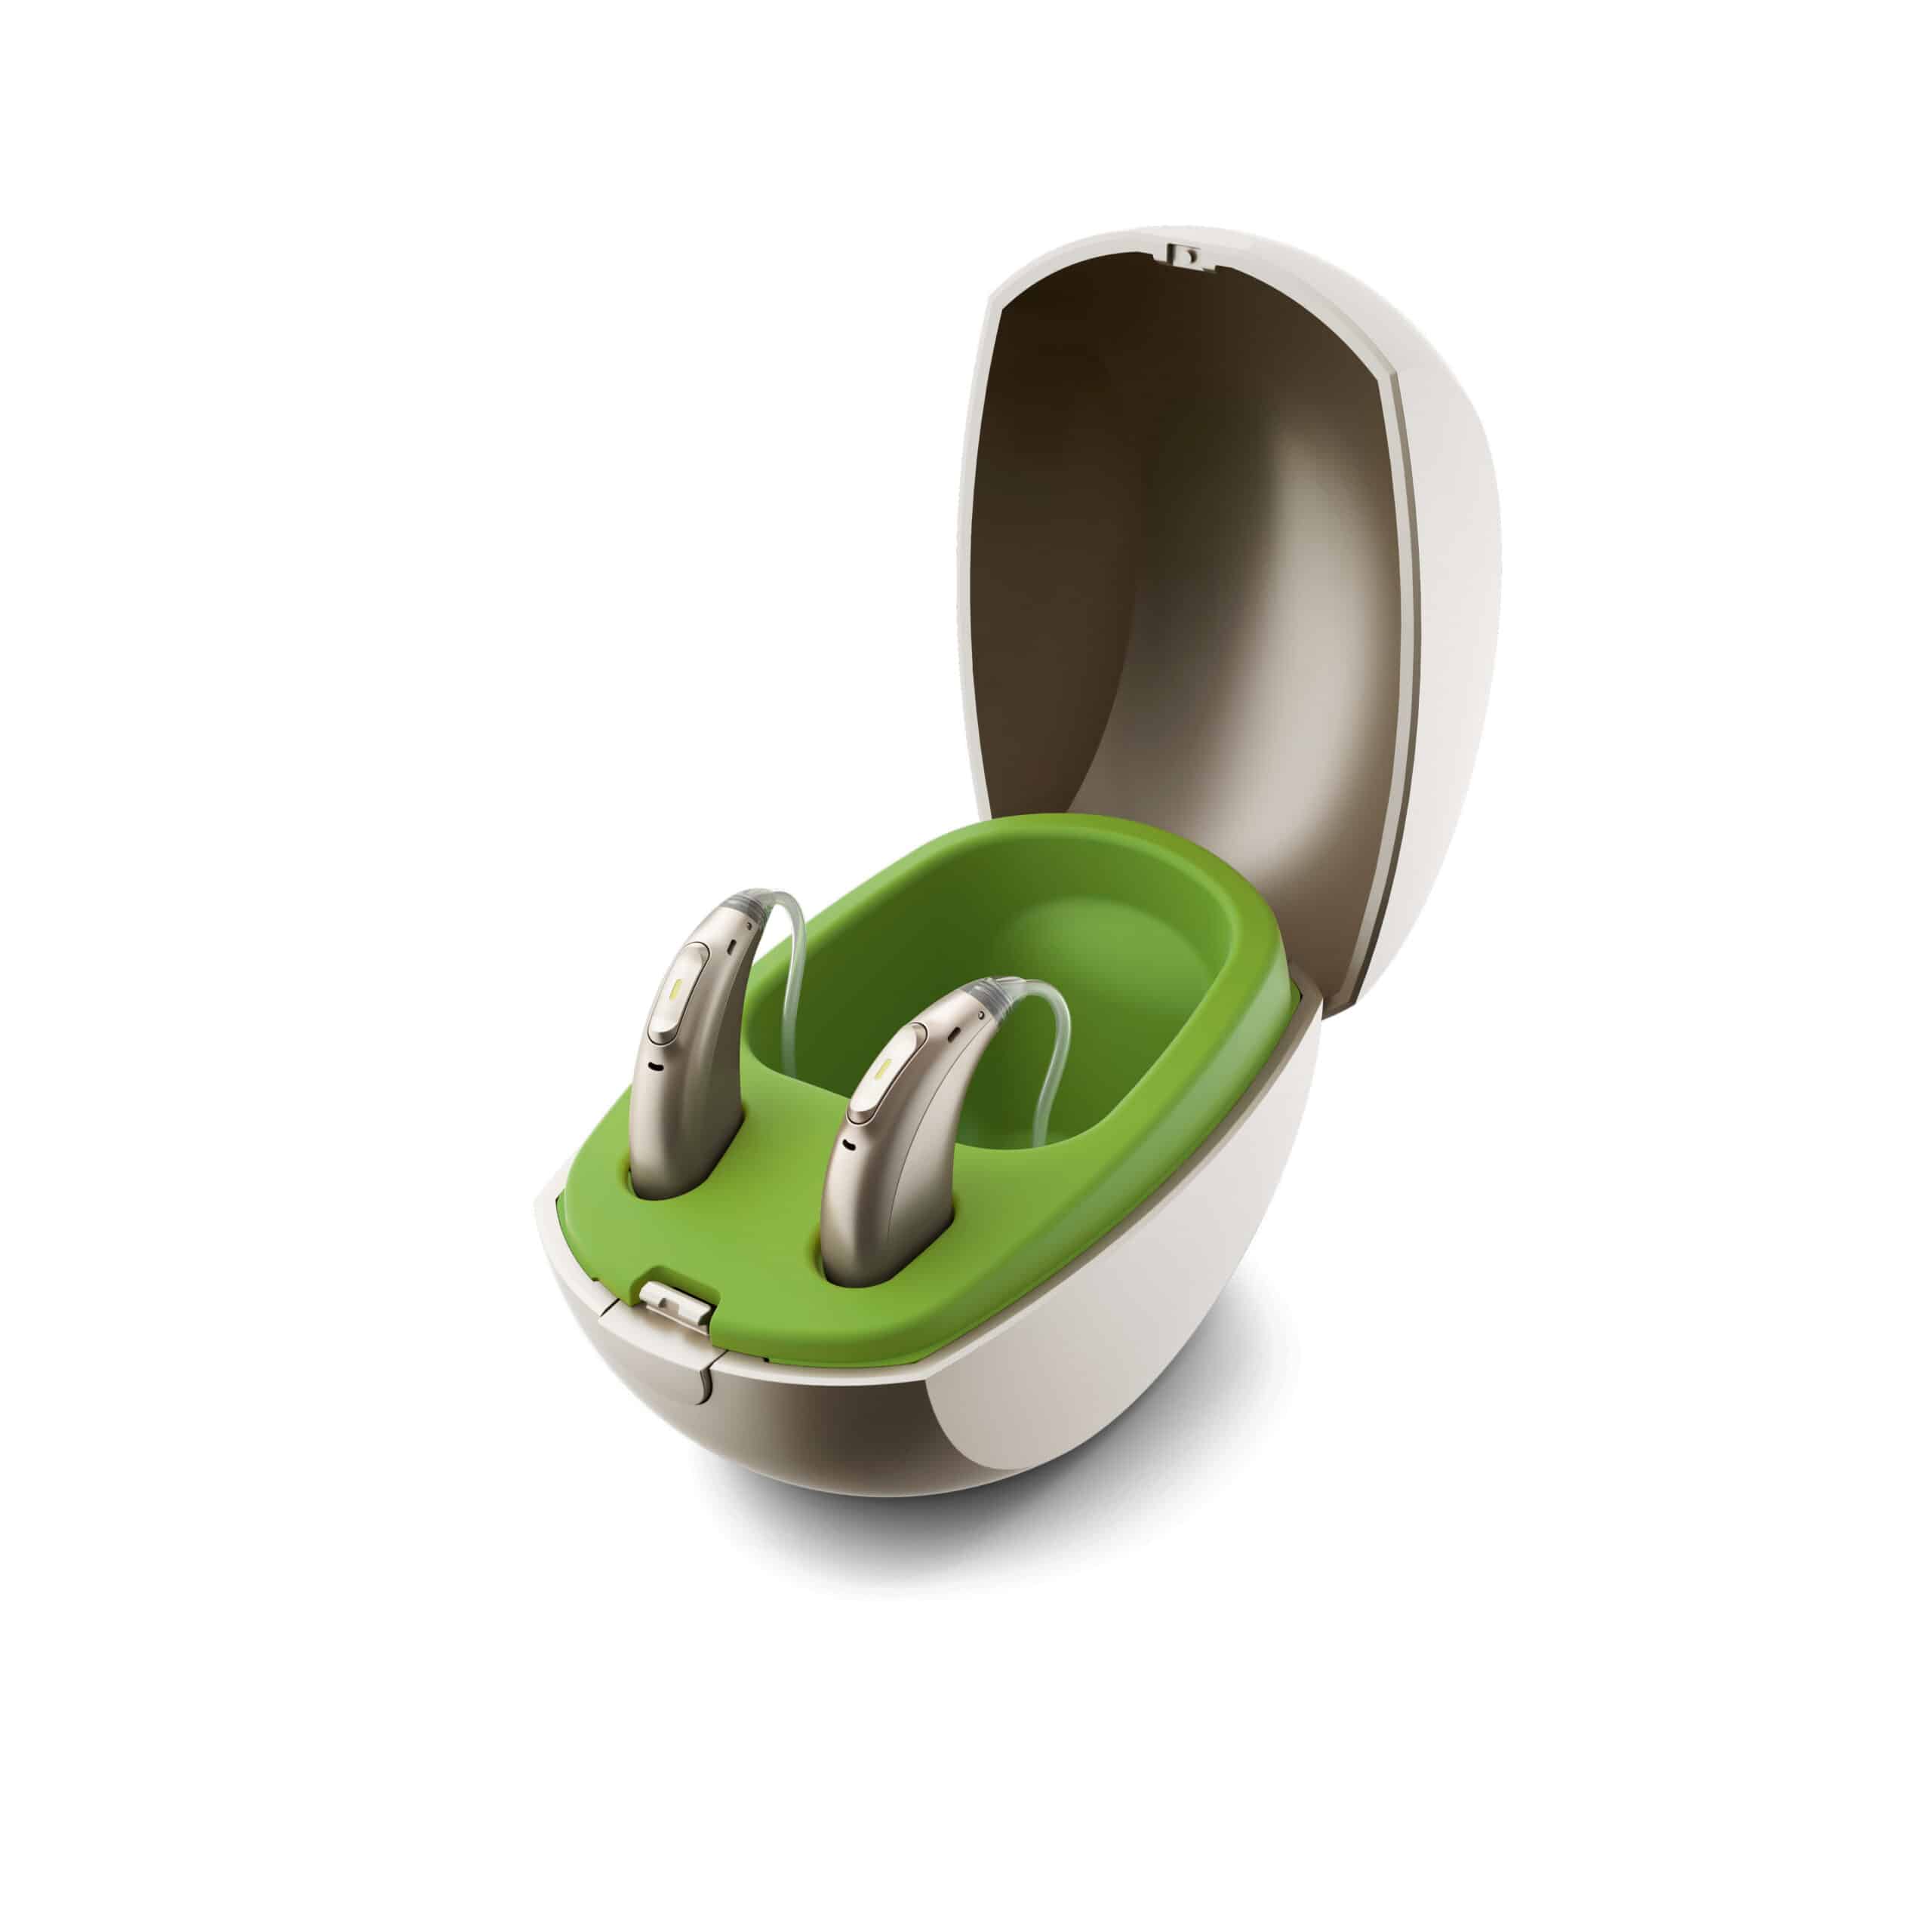 Rechargeable Hearing Aid Batteries